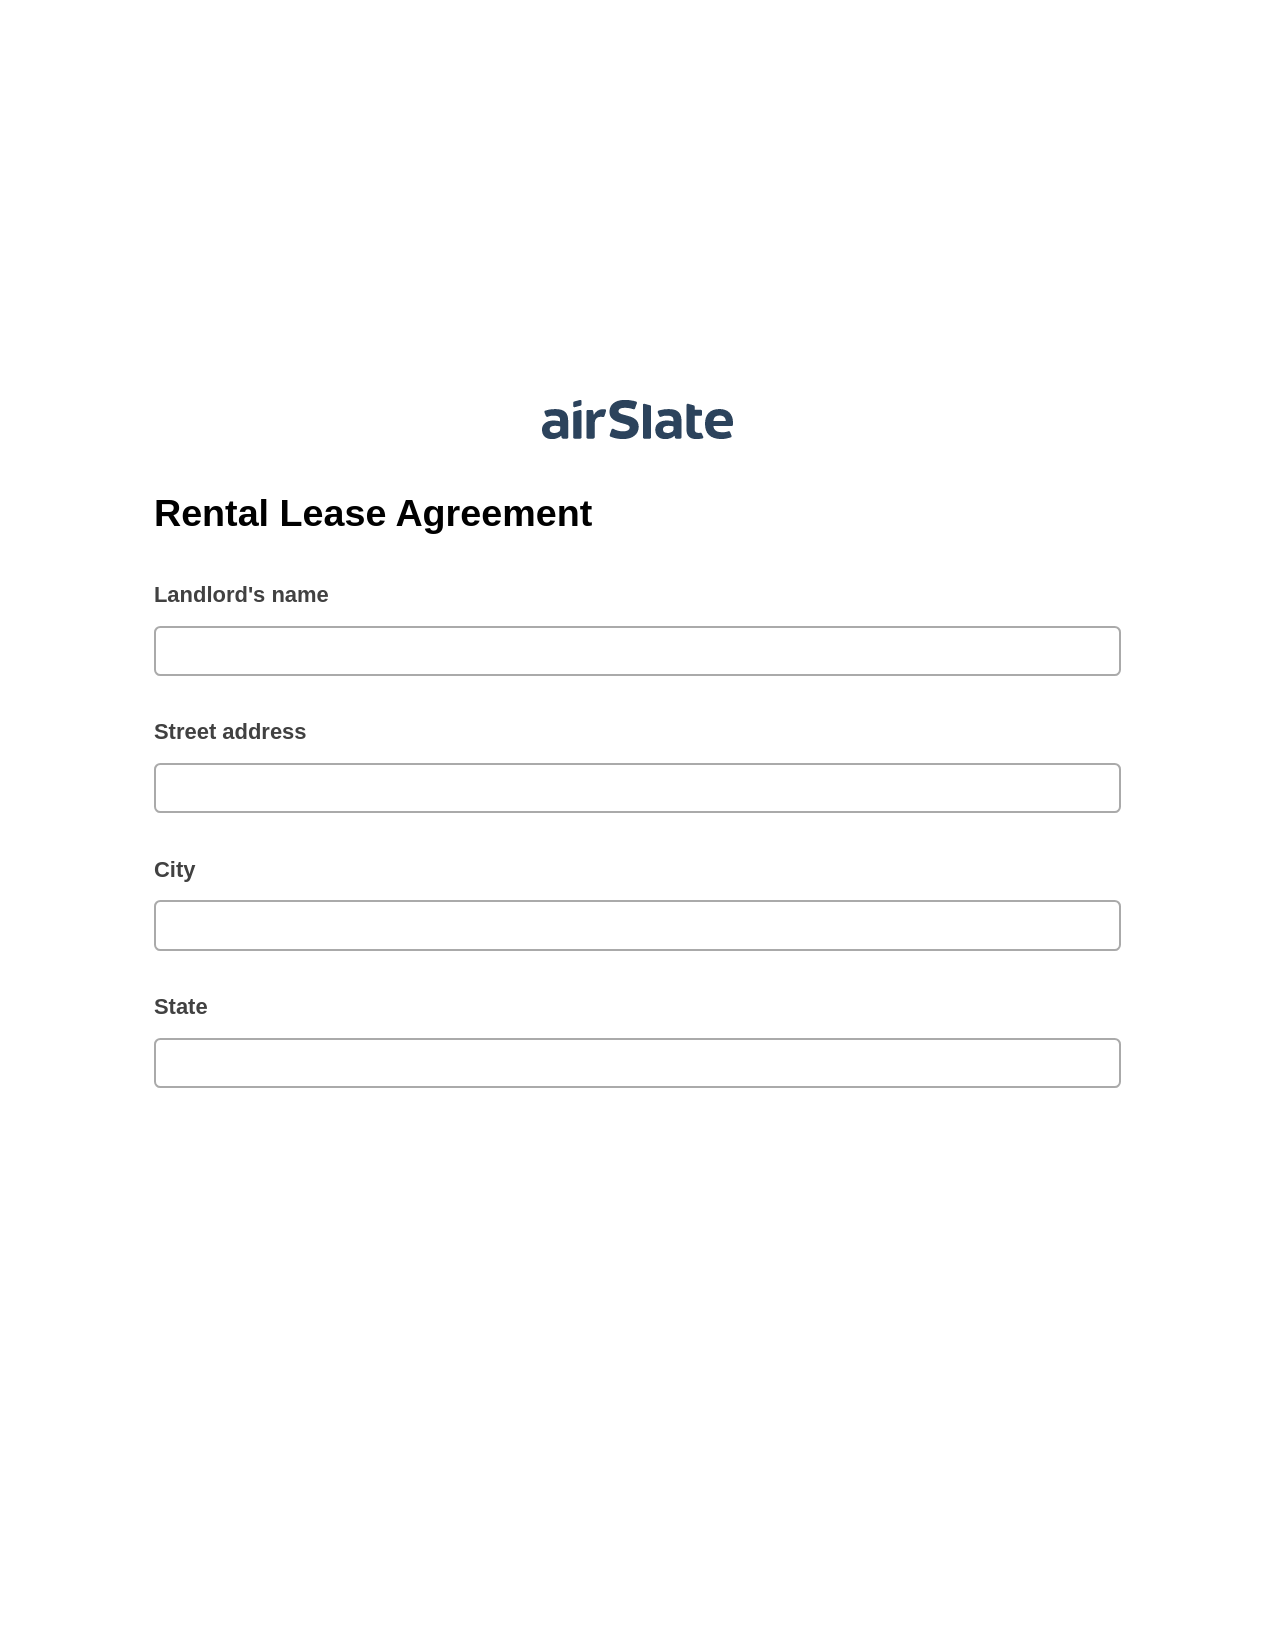 Rental Lease Agreement Pre-fill Slate from MS Dynamics 365 Records Bot, Create Slate every Google Sheet Update Bot, Dropbox Bot